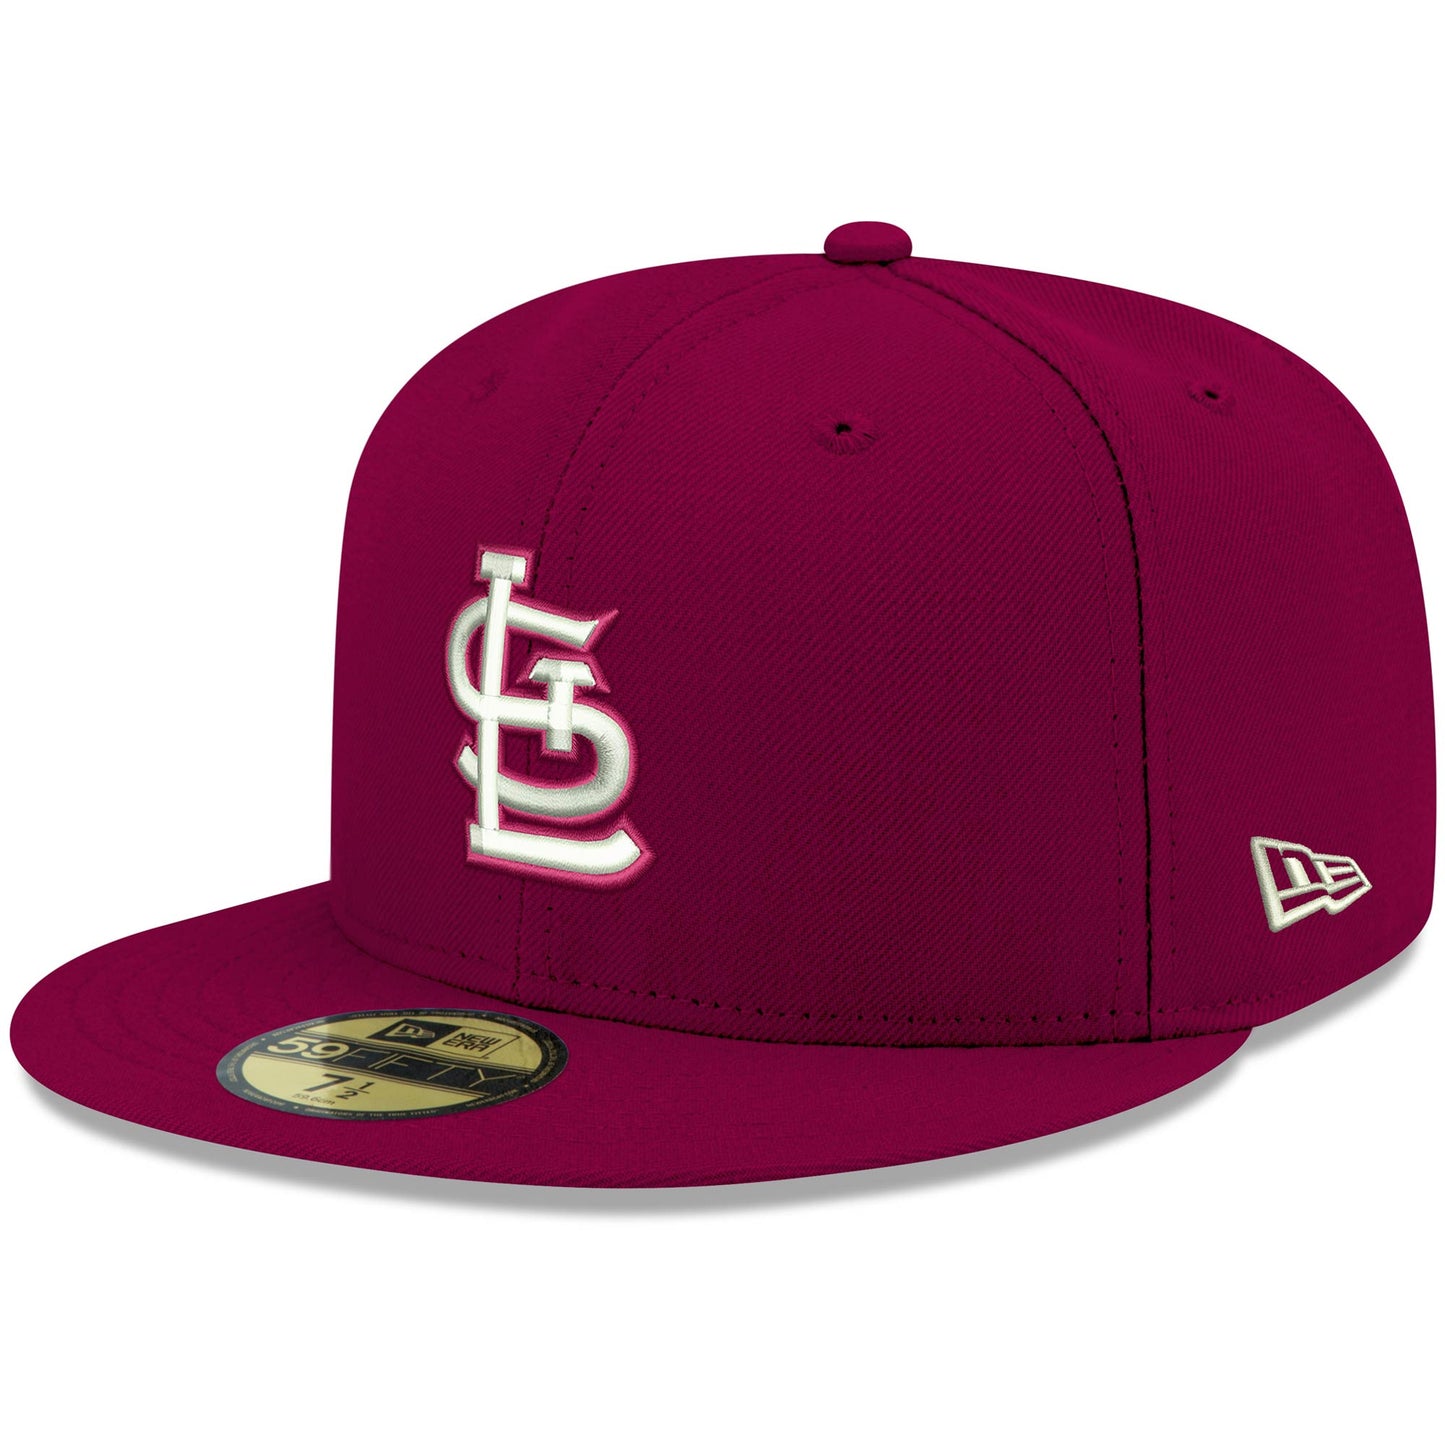 St. Louis Cardinals New Era White Logo 59FIFTY Fitted Hat - Cardinal